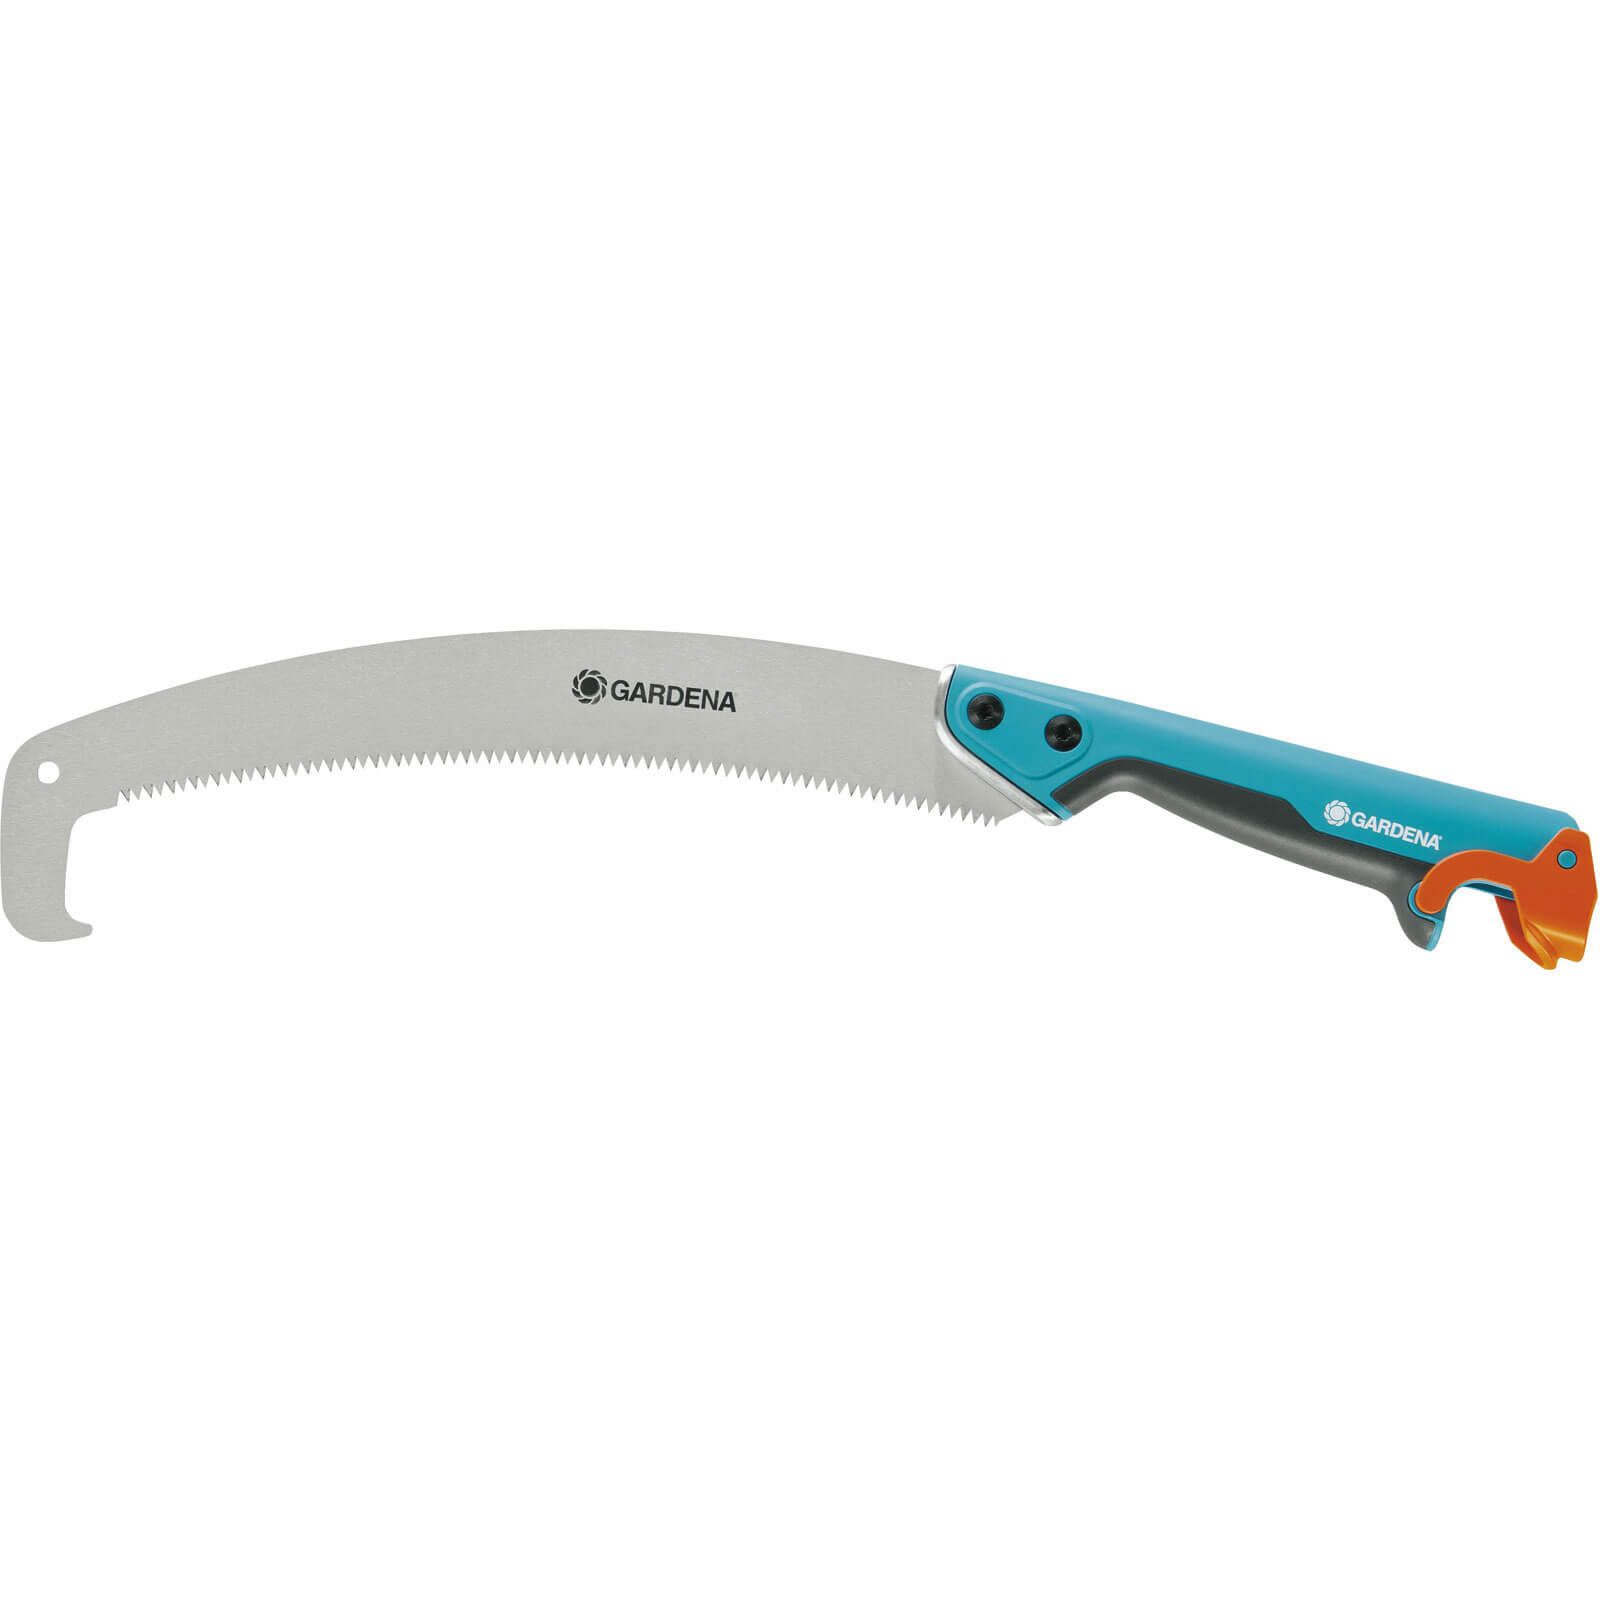 Image of Gardena COMBISYSTEM Curved Garden Pruning Saw Head 300mm